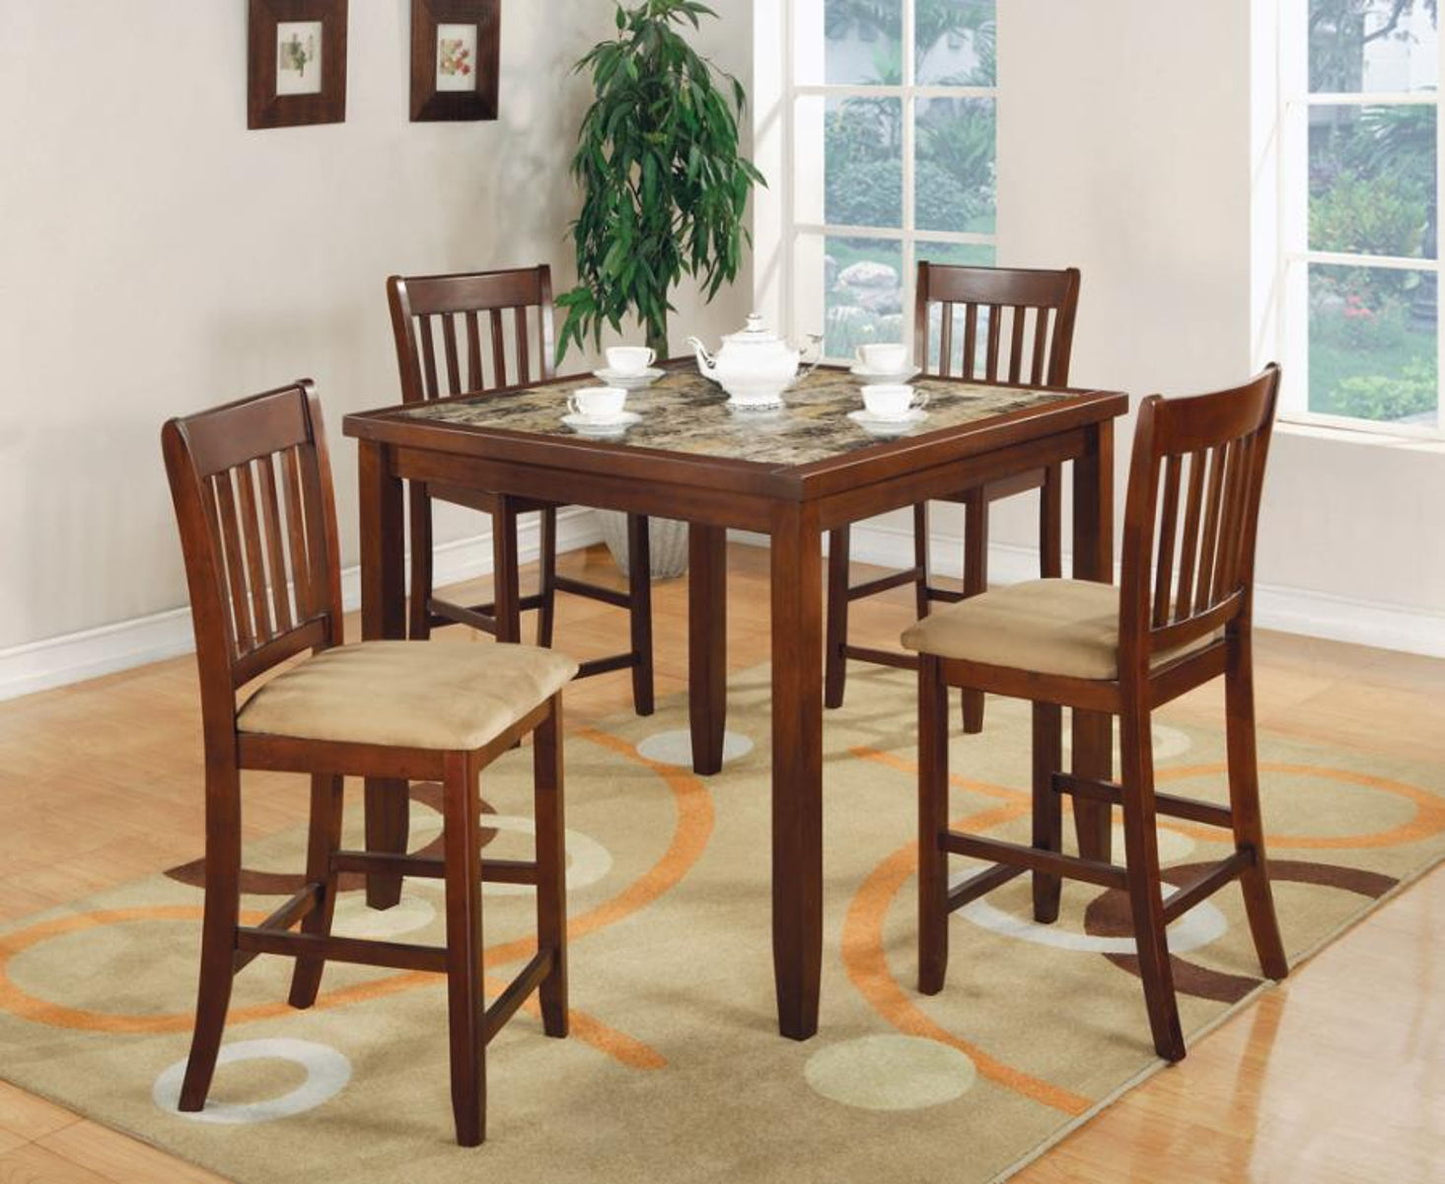 Jardin - 5 Piece Counter Height Dining Set - Red Brown And Tan